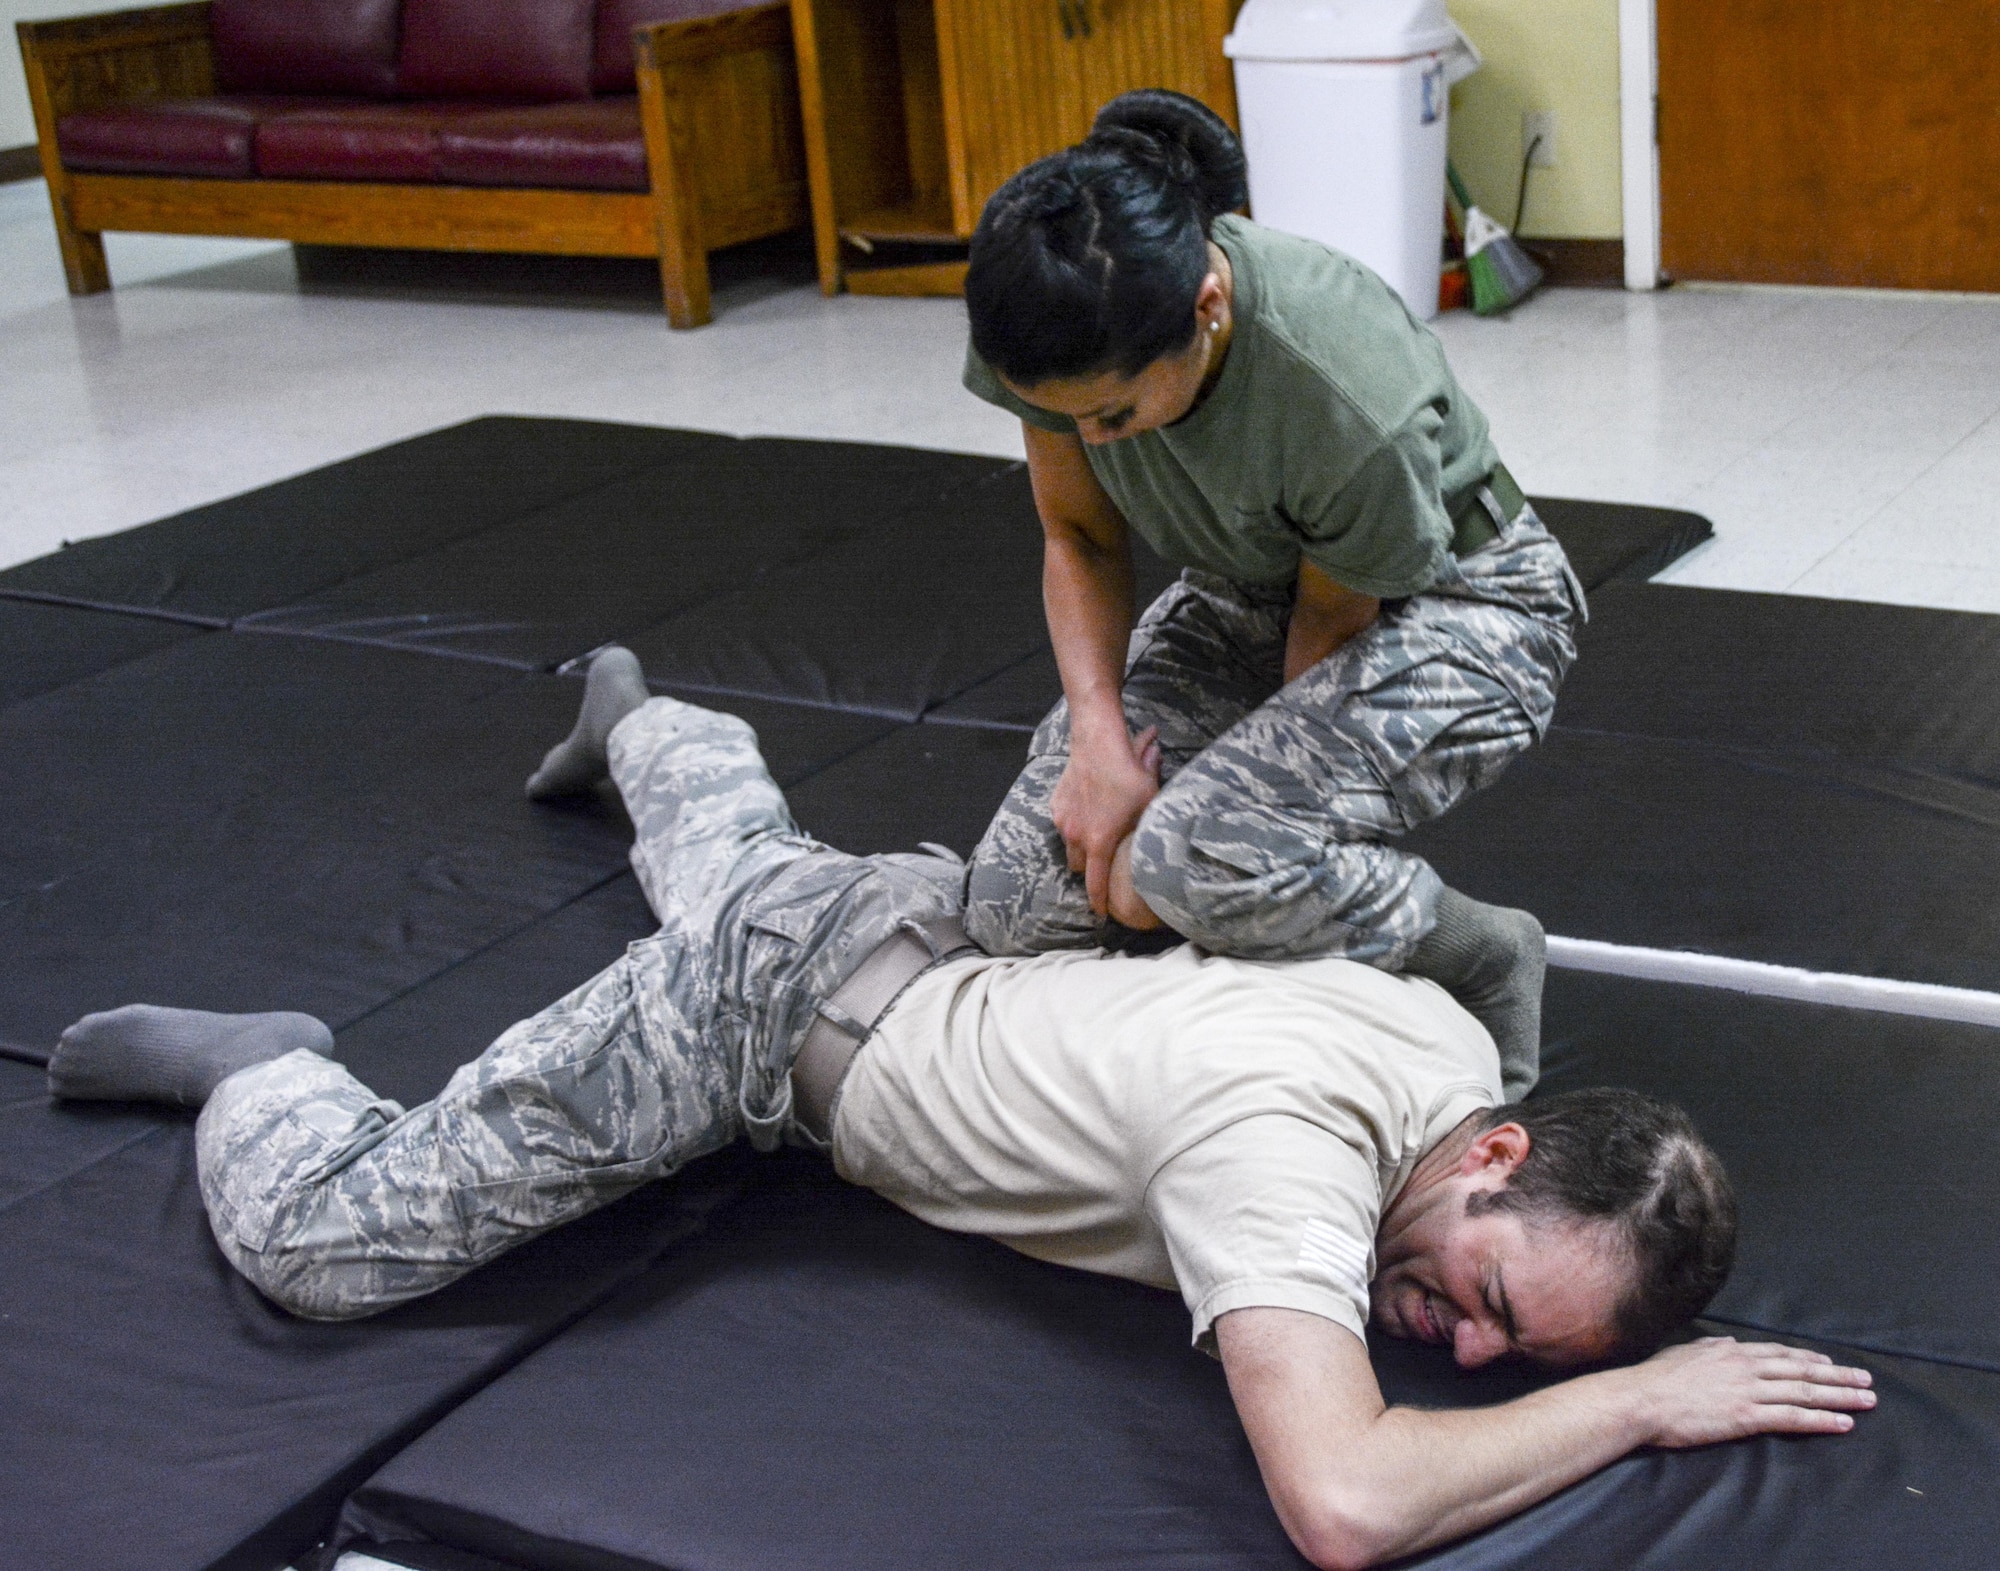 U.S. Air Force Capt.  Elizabeth Guidara , 315th Training Squadron student, demonstrates combative techniques on U.S. Air Force Capt. Justin Arbogast, 315th Training Squadron student, during her course at the local women’s shelter San Angelo, TX, Oct 21, 2017. Guidara initiated the program to teach women skills and techniques against physical intimidation.